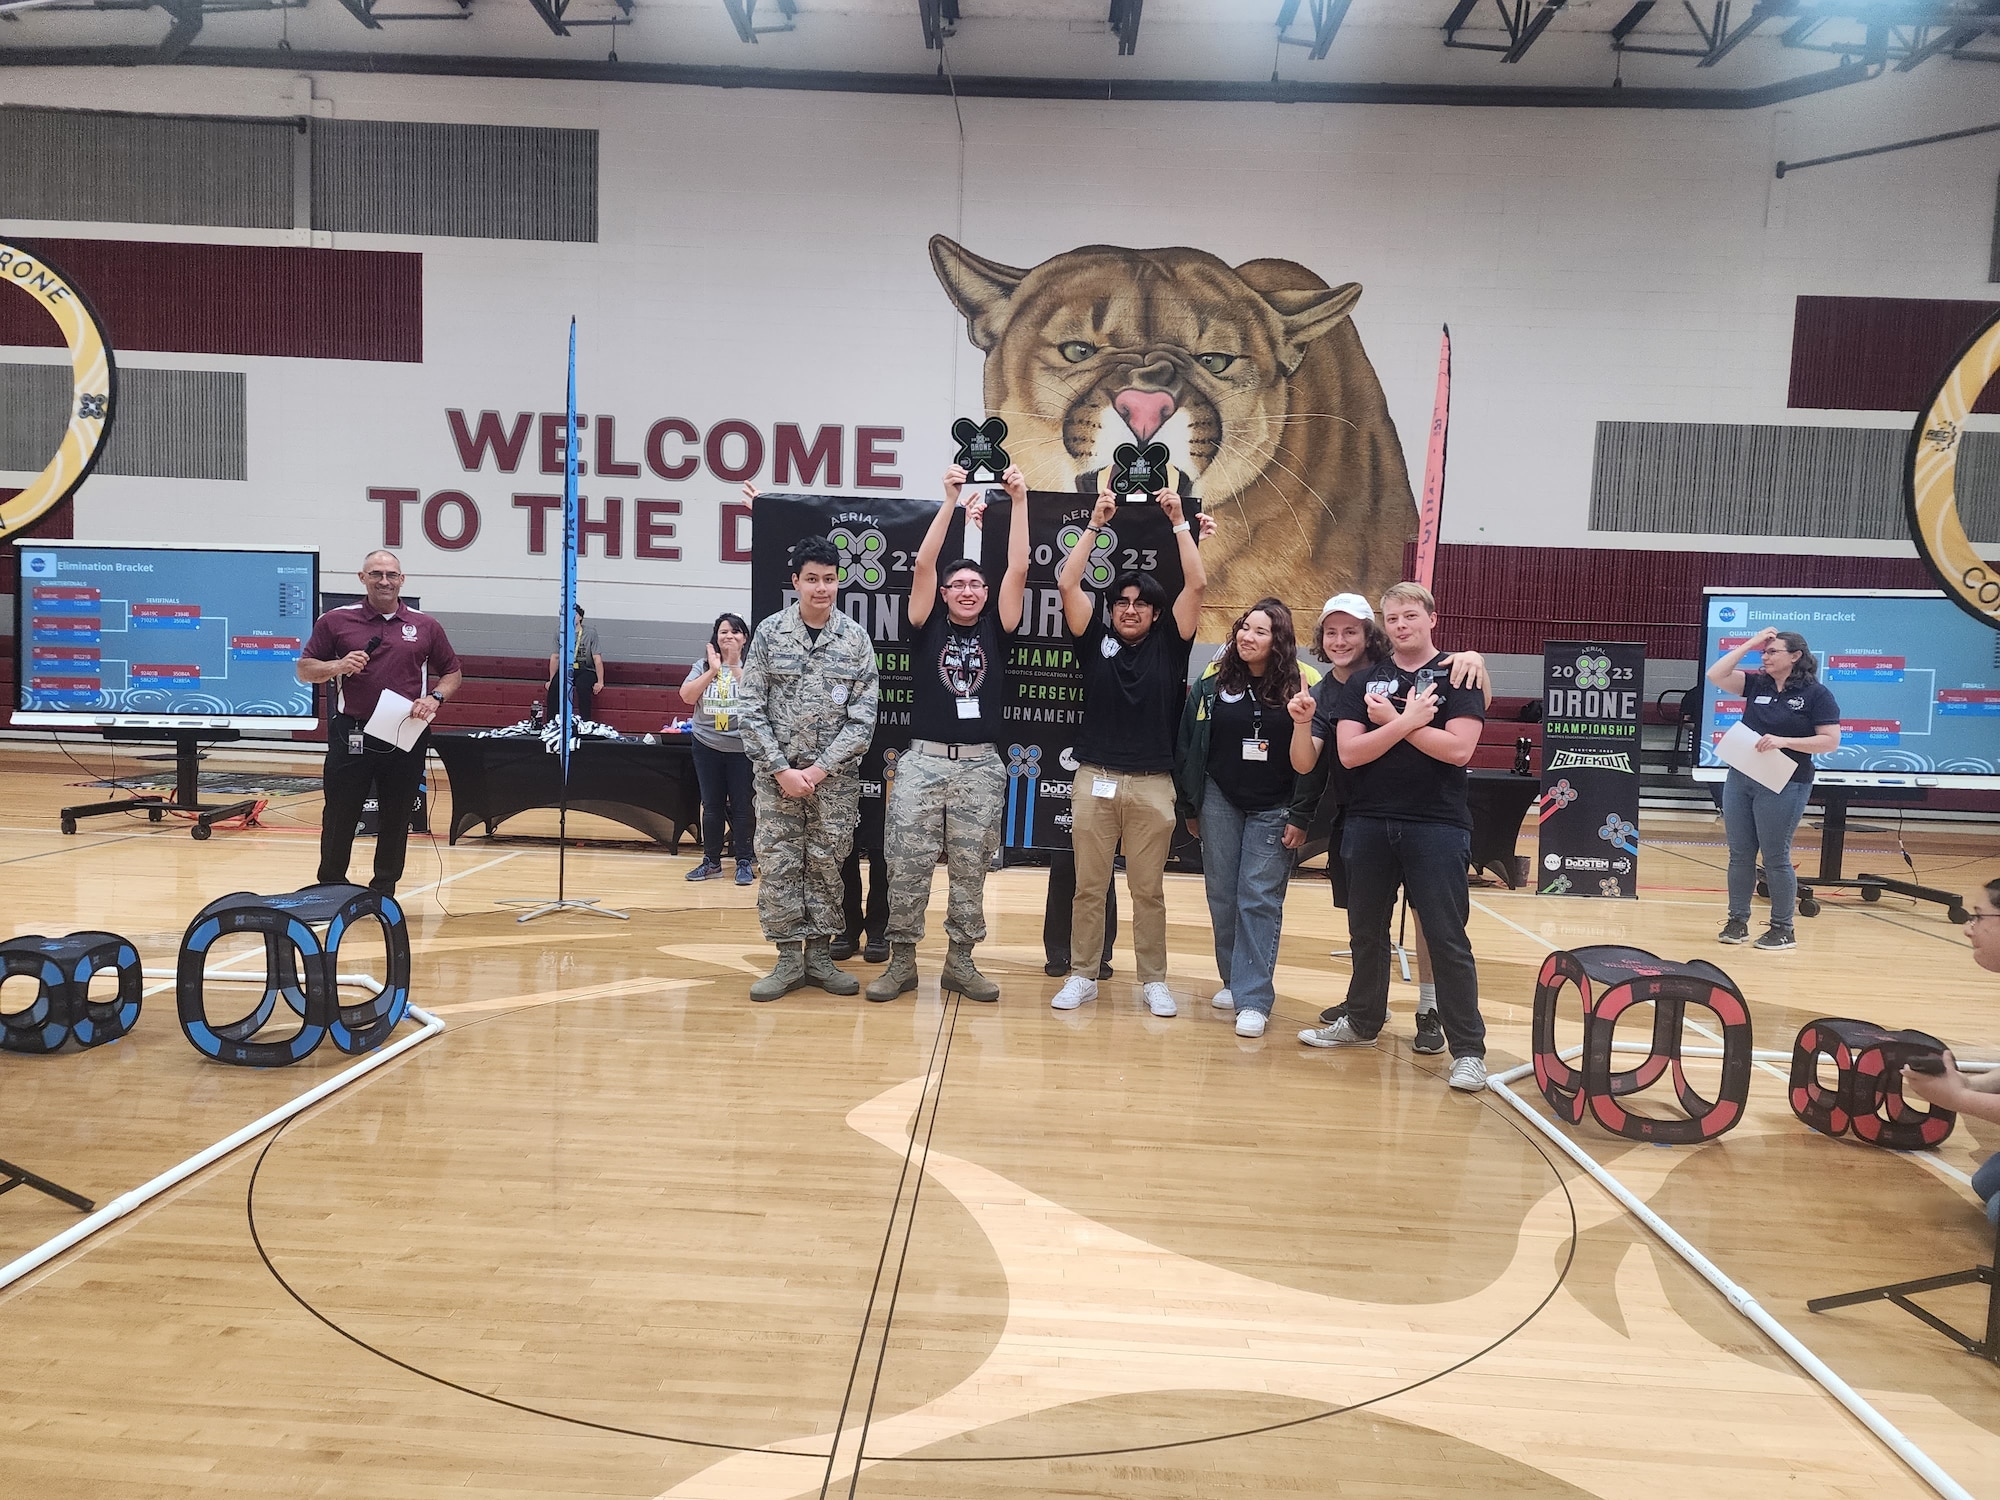 The national tournament championship was awarded her cadets at TX-924 AFJROTC, Team 92401B, Aerium, and their alliance team, Team 35084A, MHP Drone Racers 1, Madison Highland Prep, Phoenix, AZ.